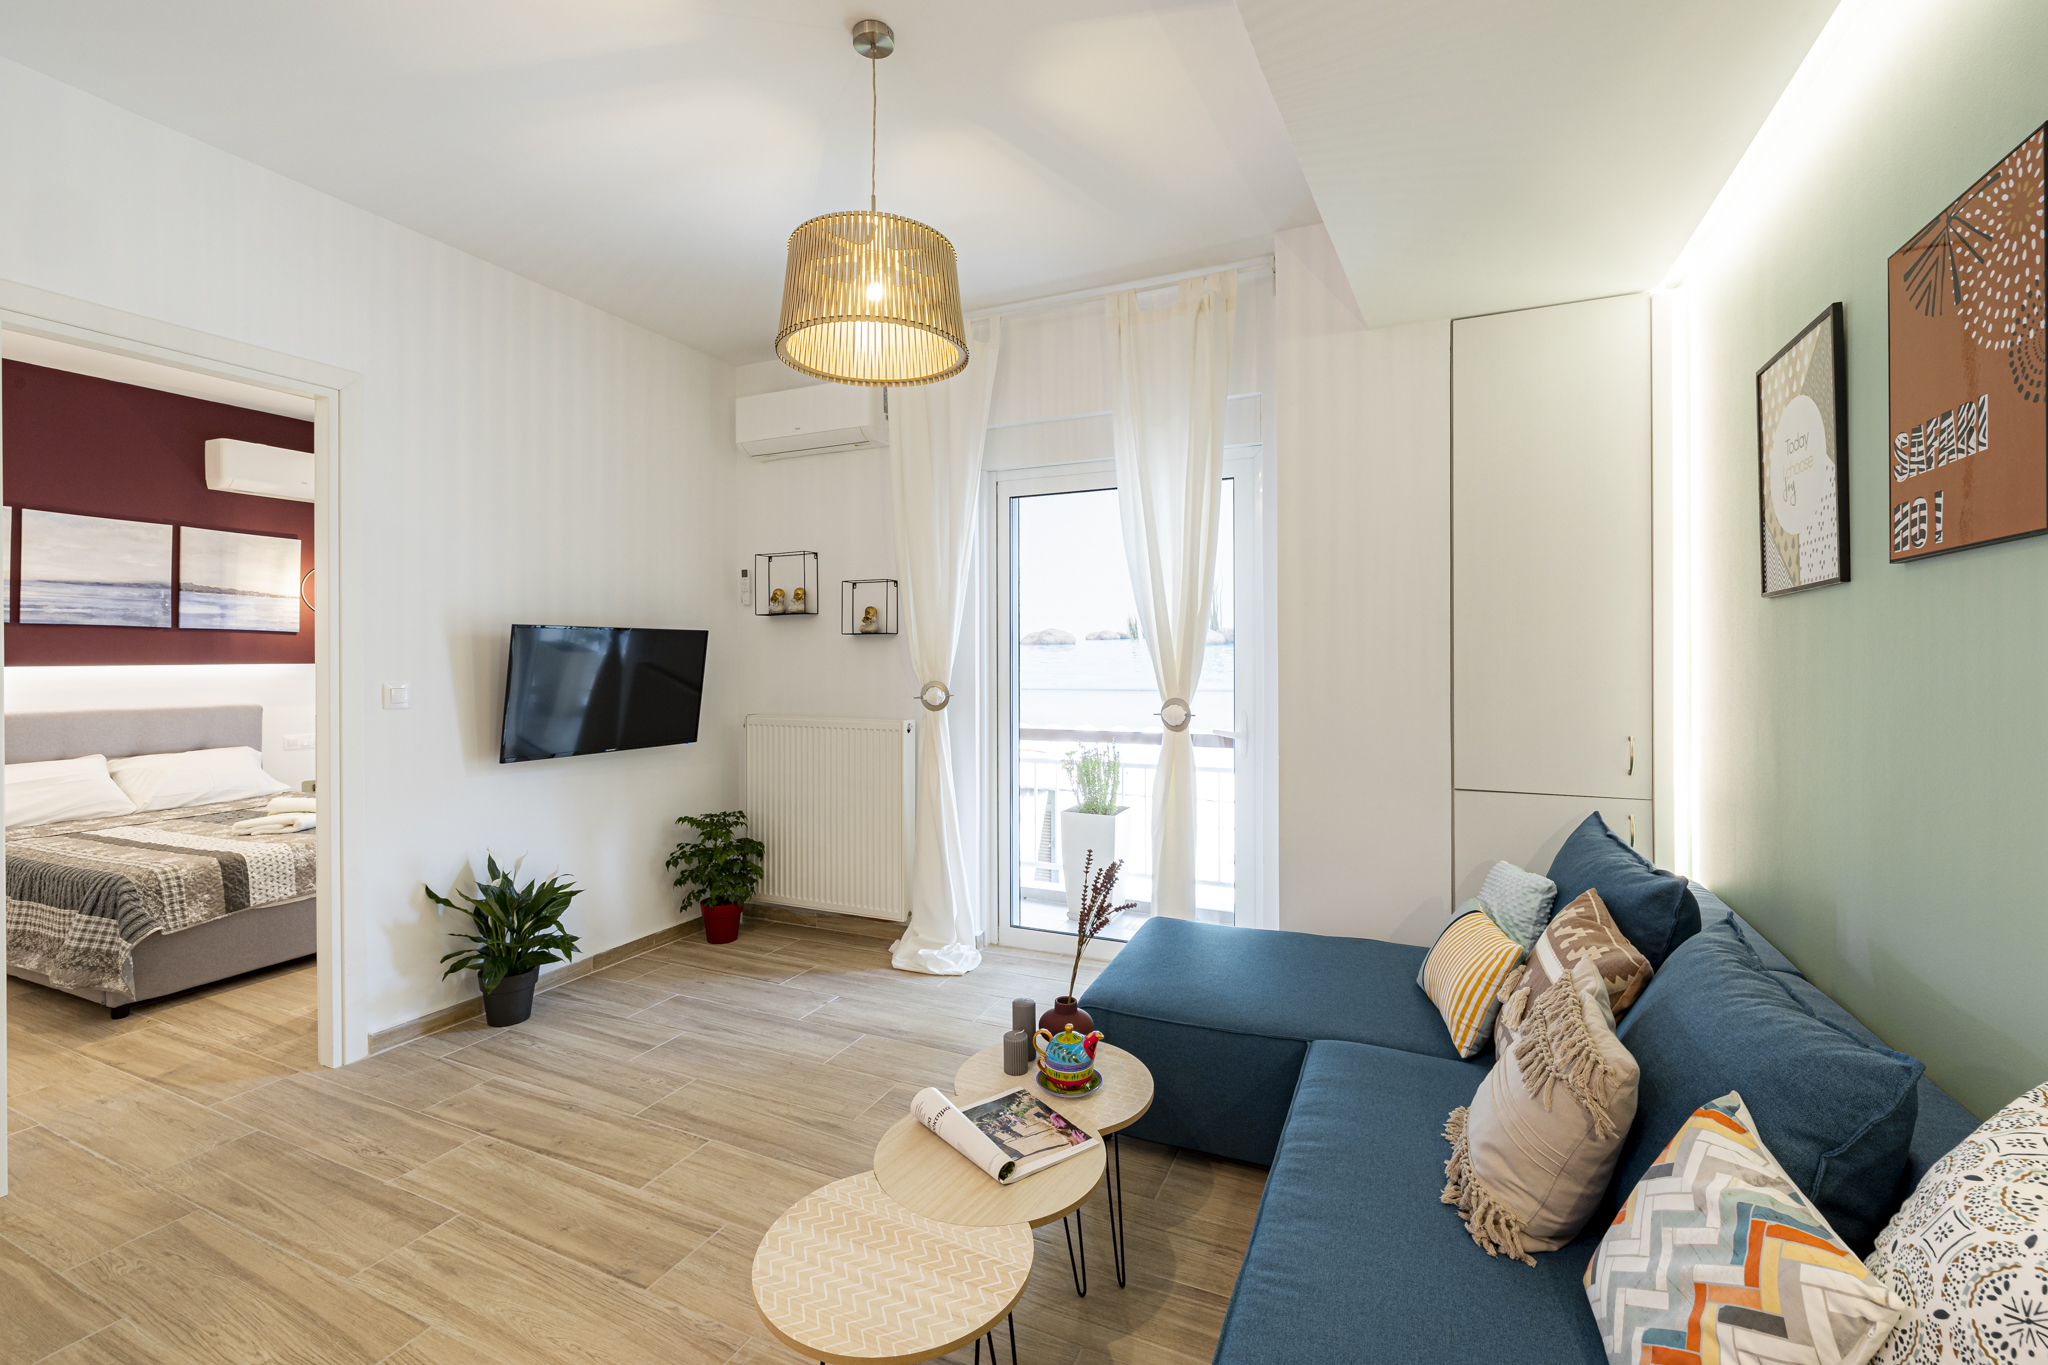 Property Management airbnb athens